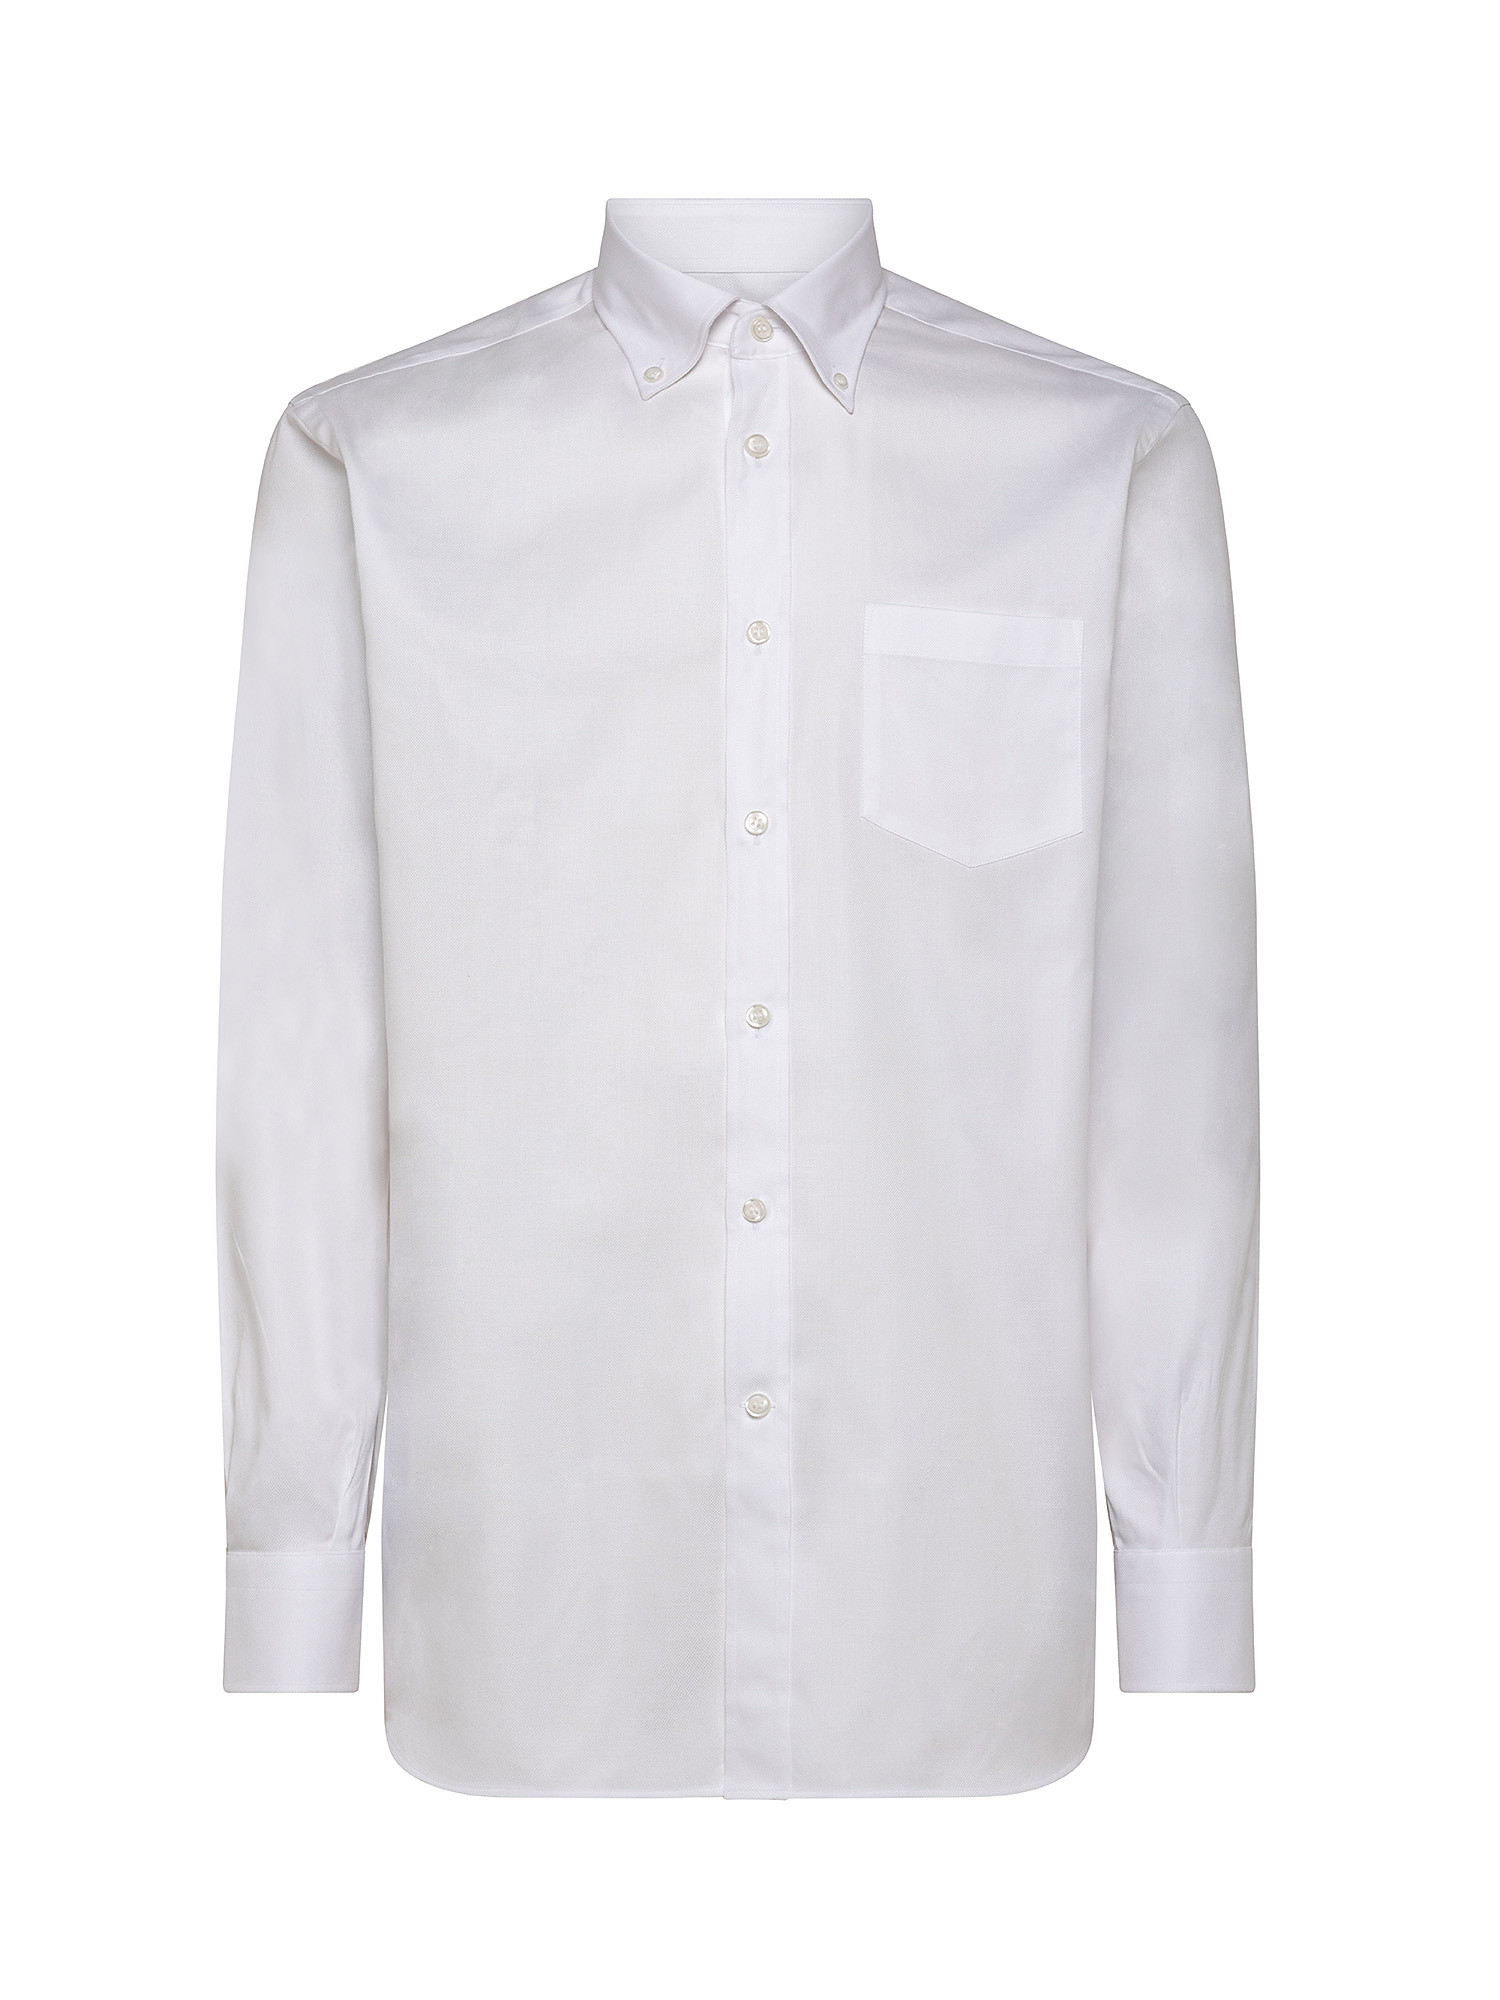 Camicia slim fit cotone oxford, Bianco, large image number 0